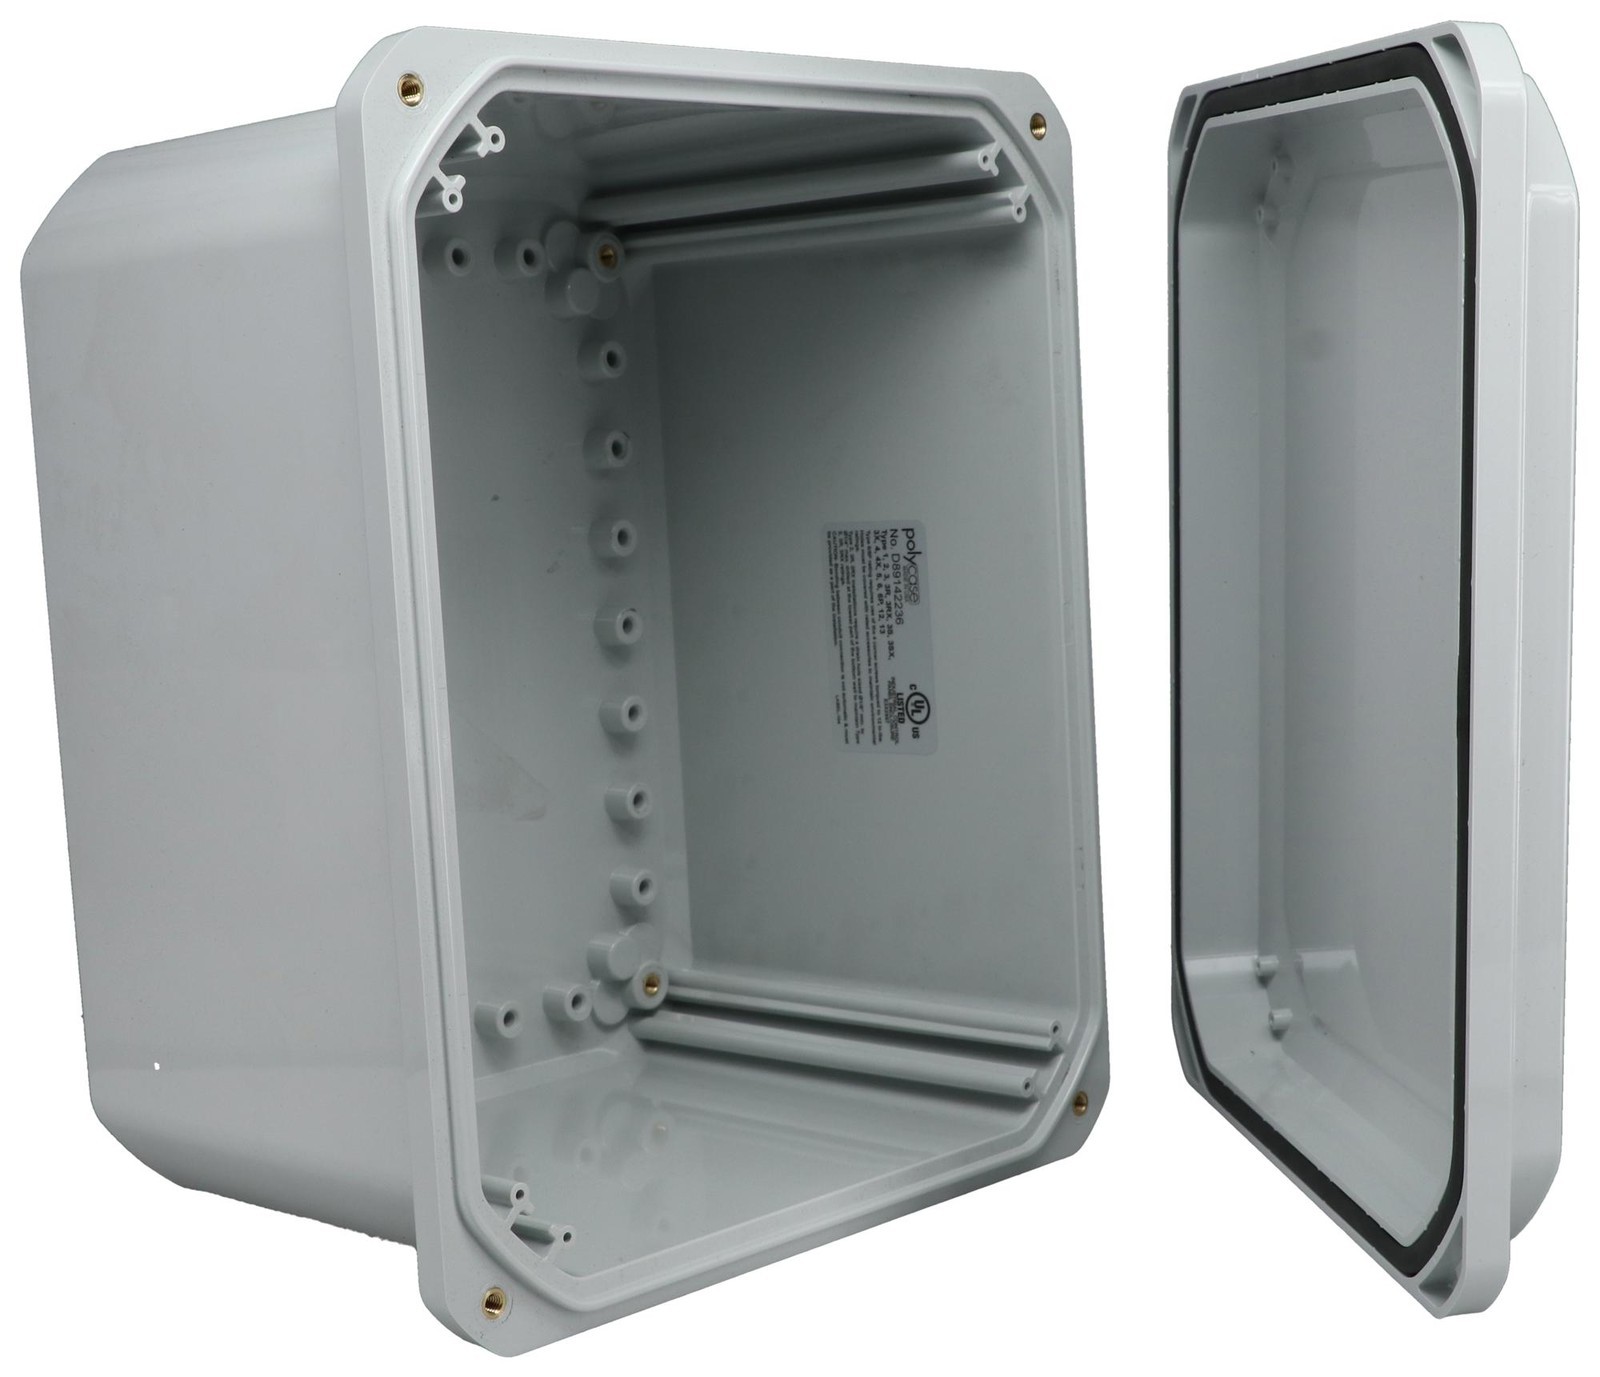 Bud Industries Dps-28711 Enclosure, Outdoor, Pc, Light Grey